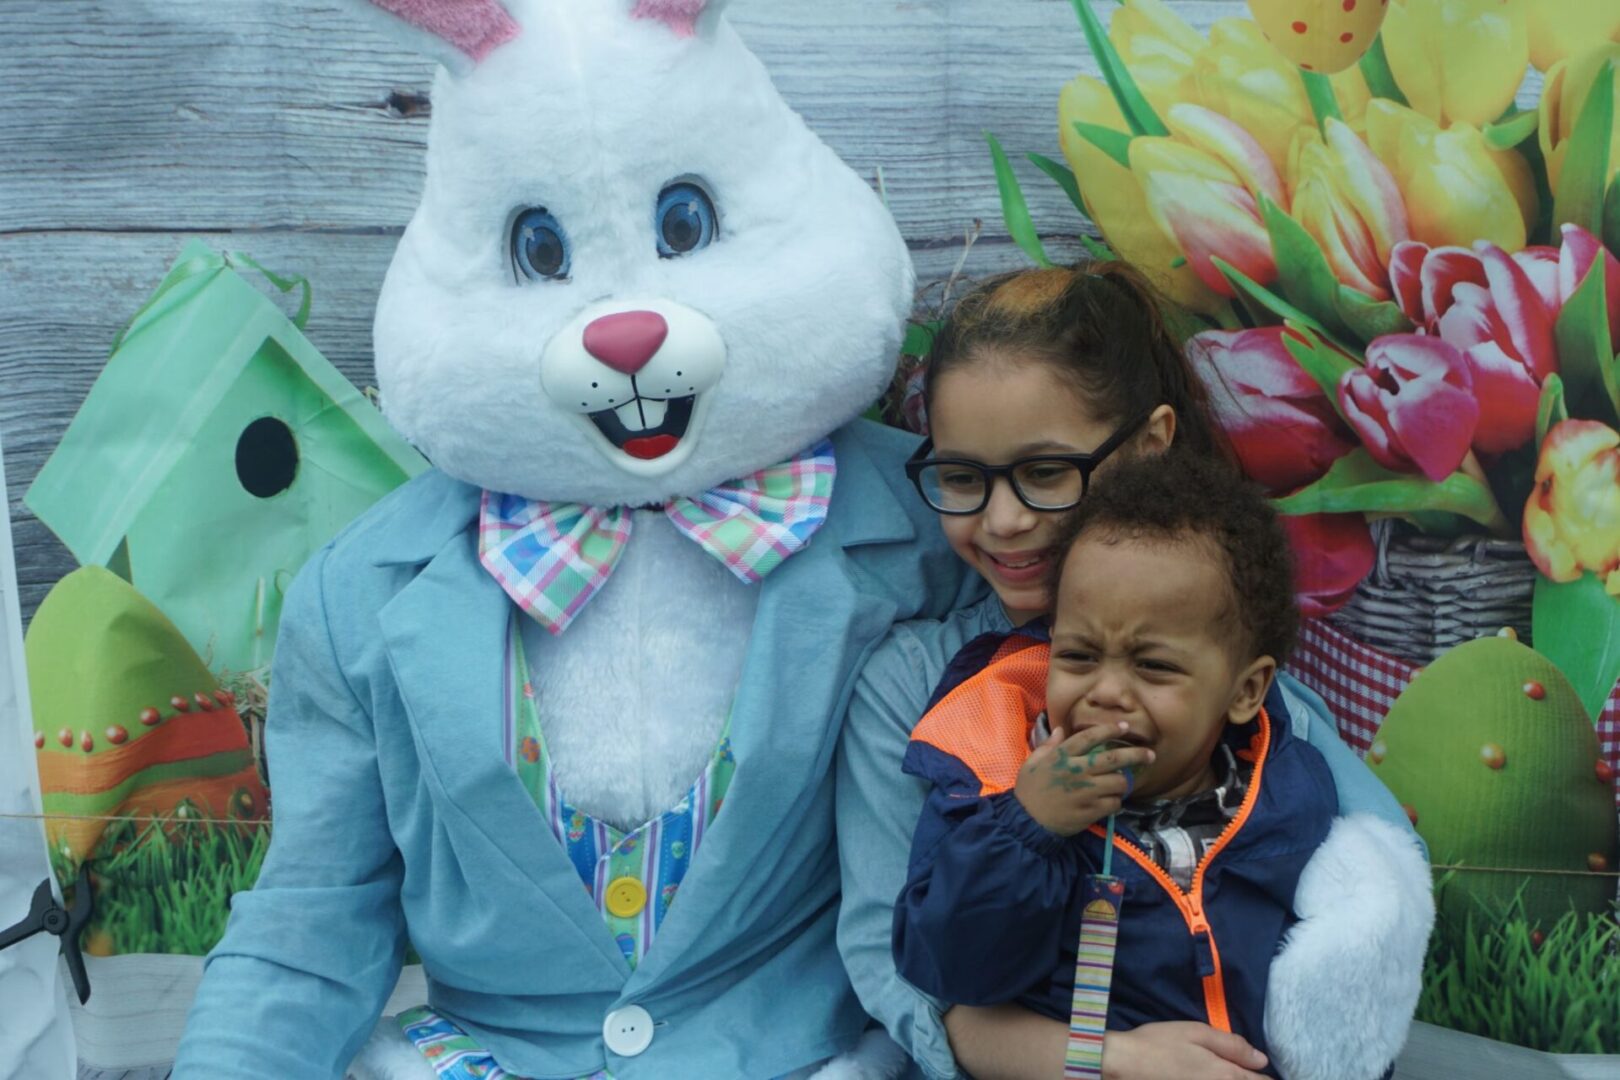 The bunny mascot and a girl with glasses carrying a crying boy